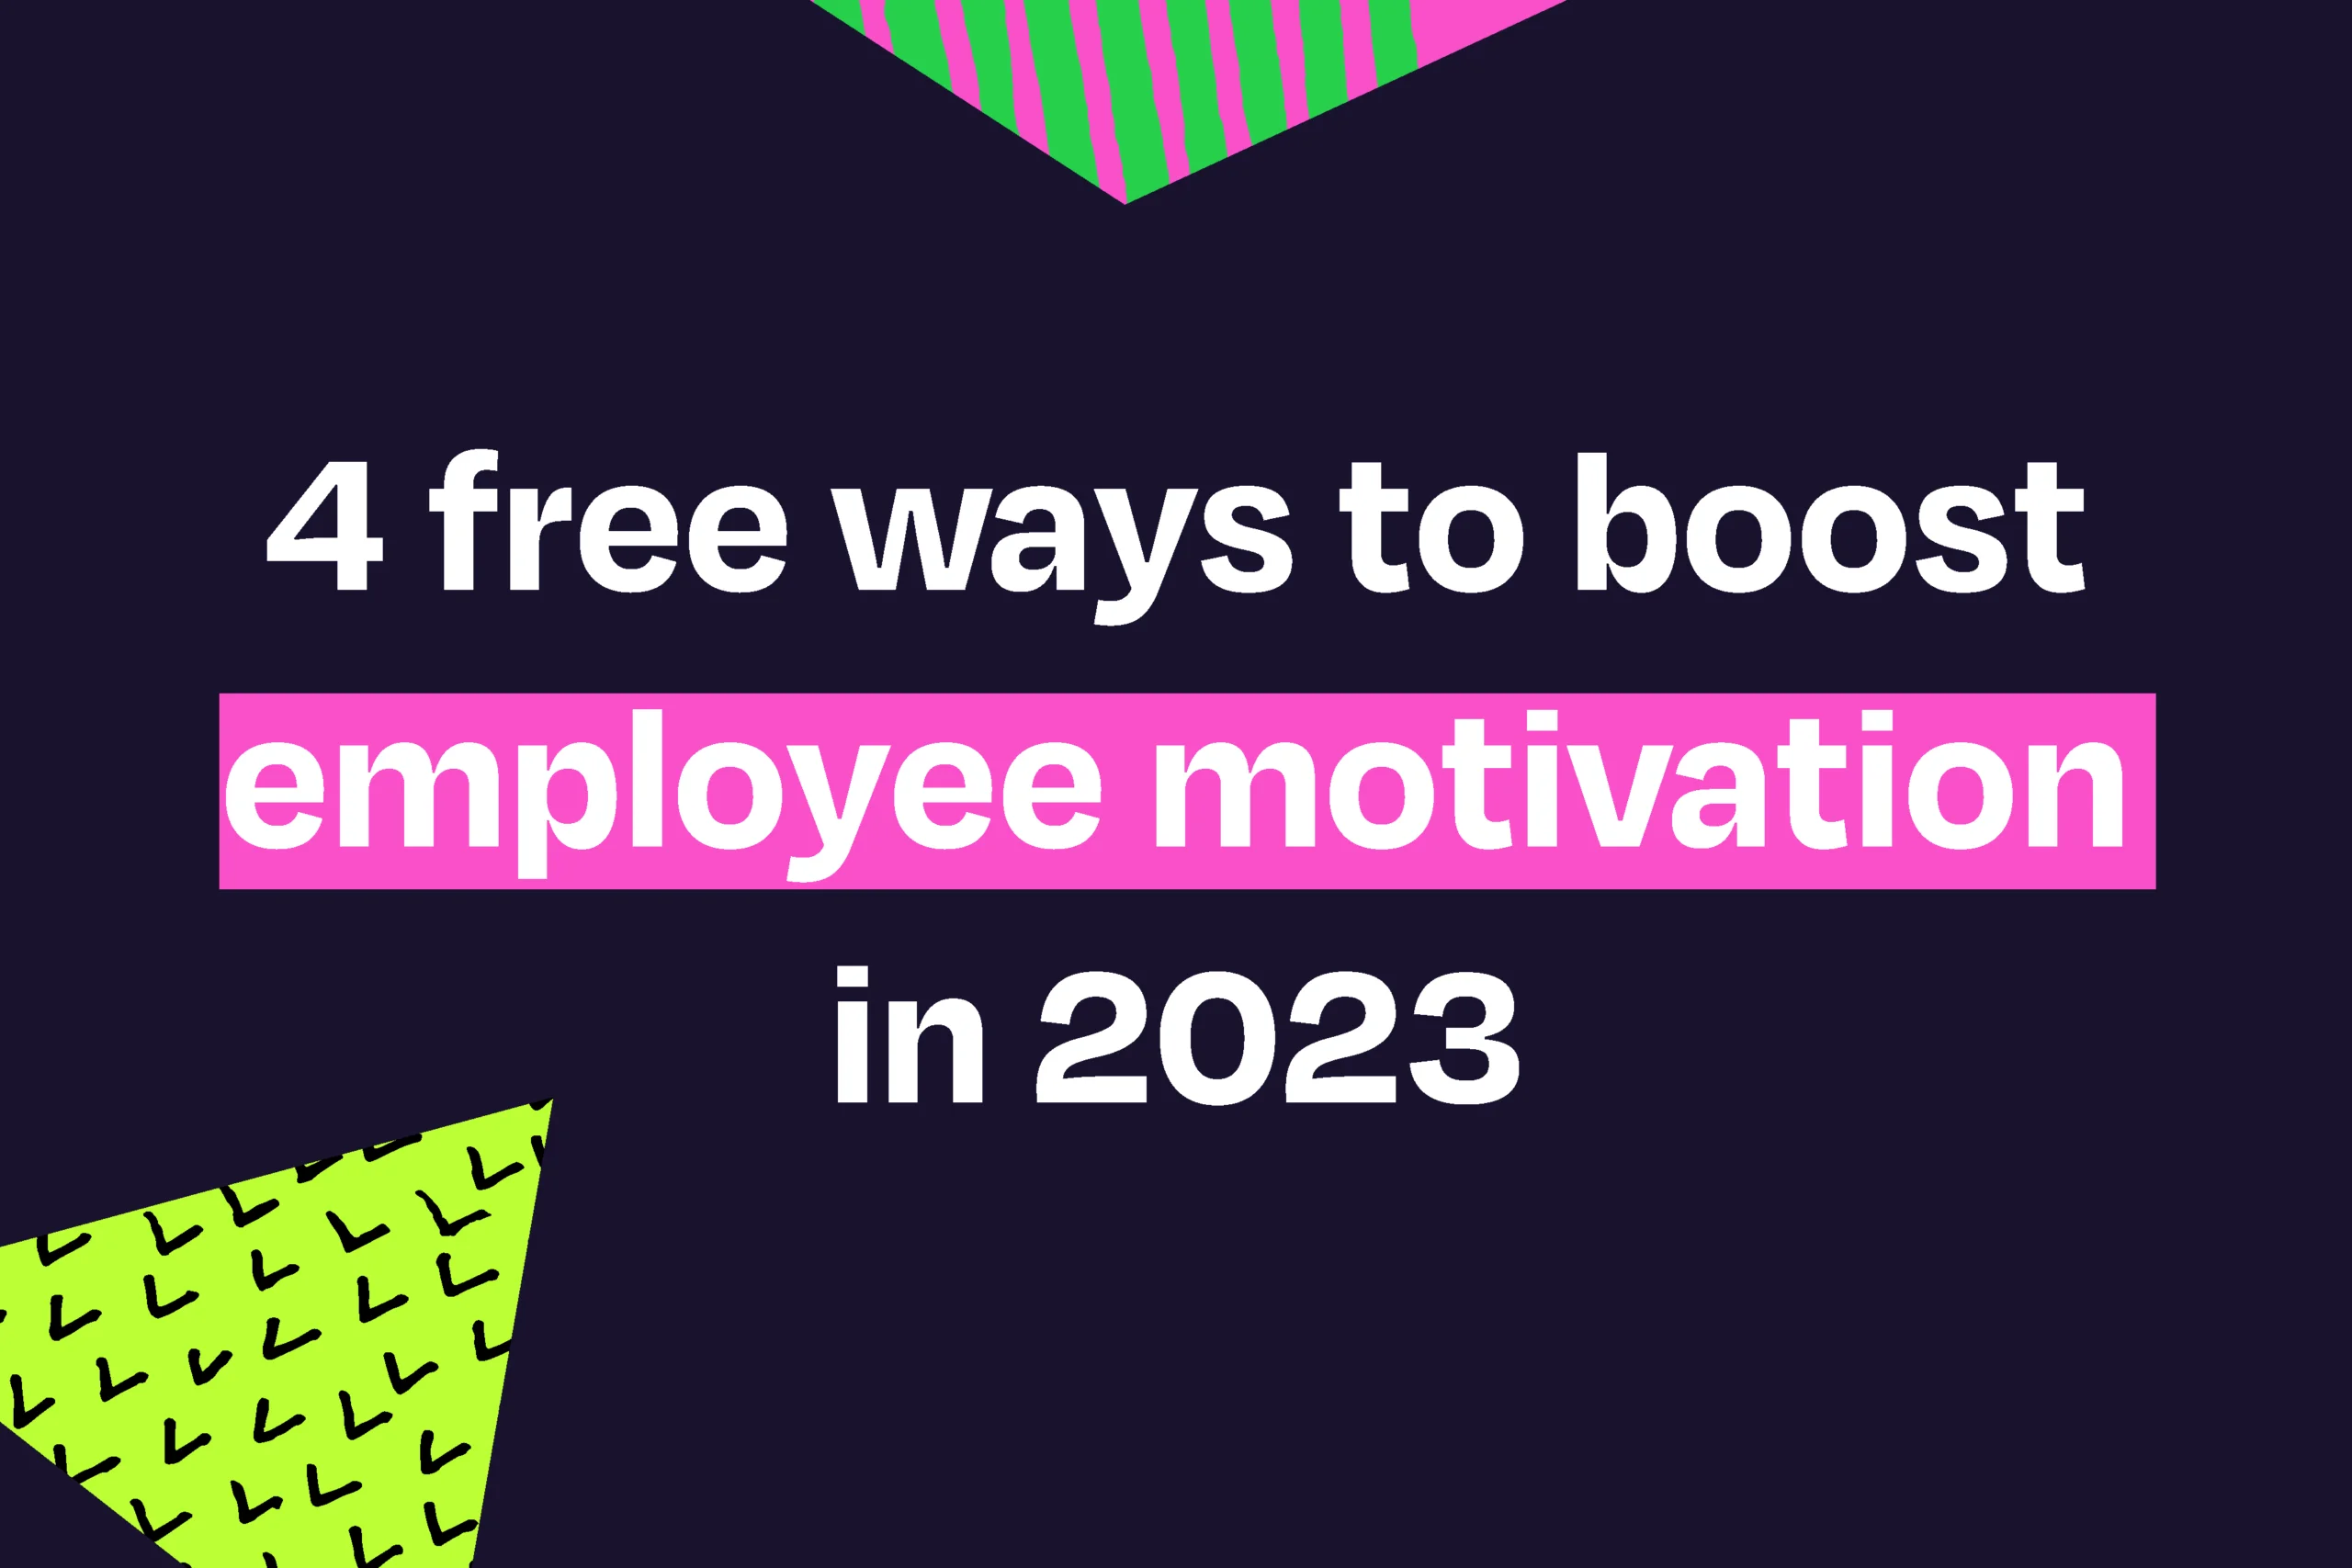 Blog title with "employee motivation" highlighted pink on a dark background.